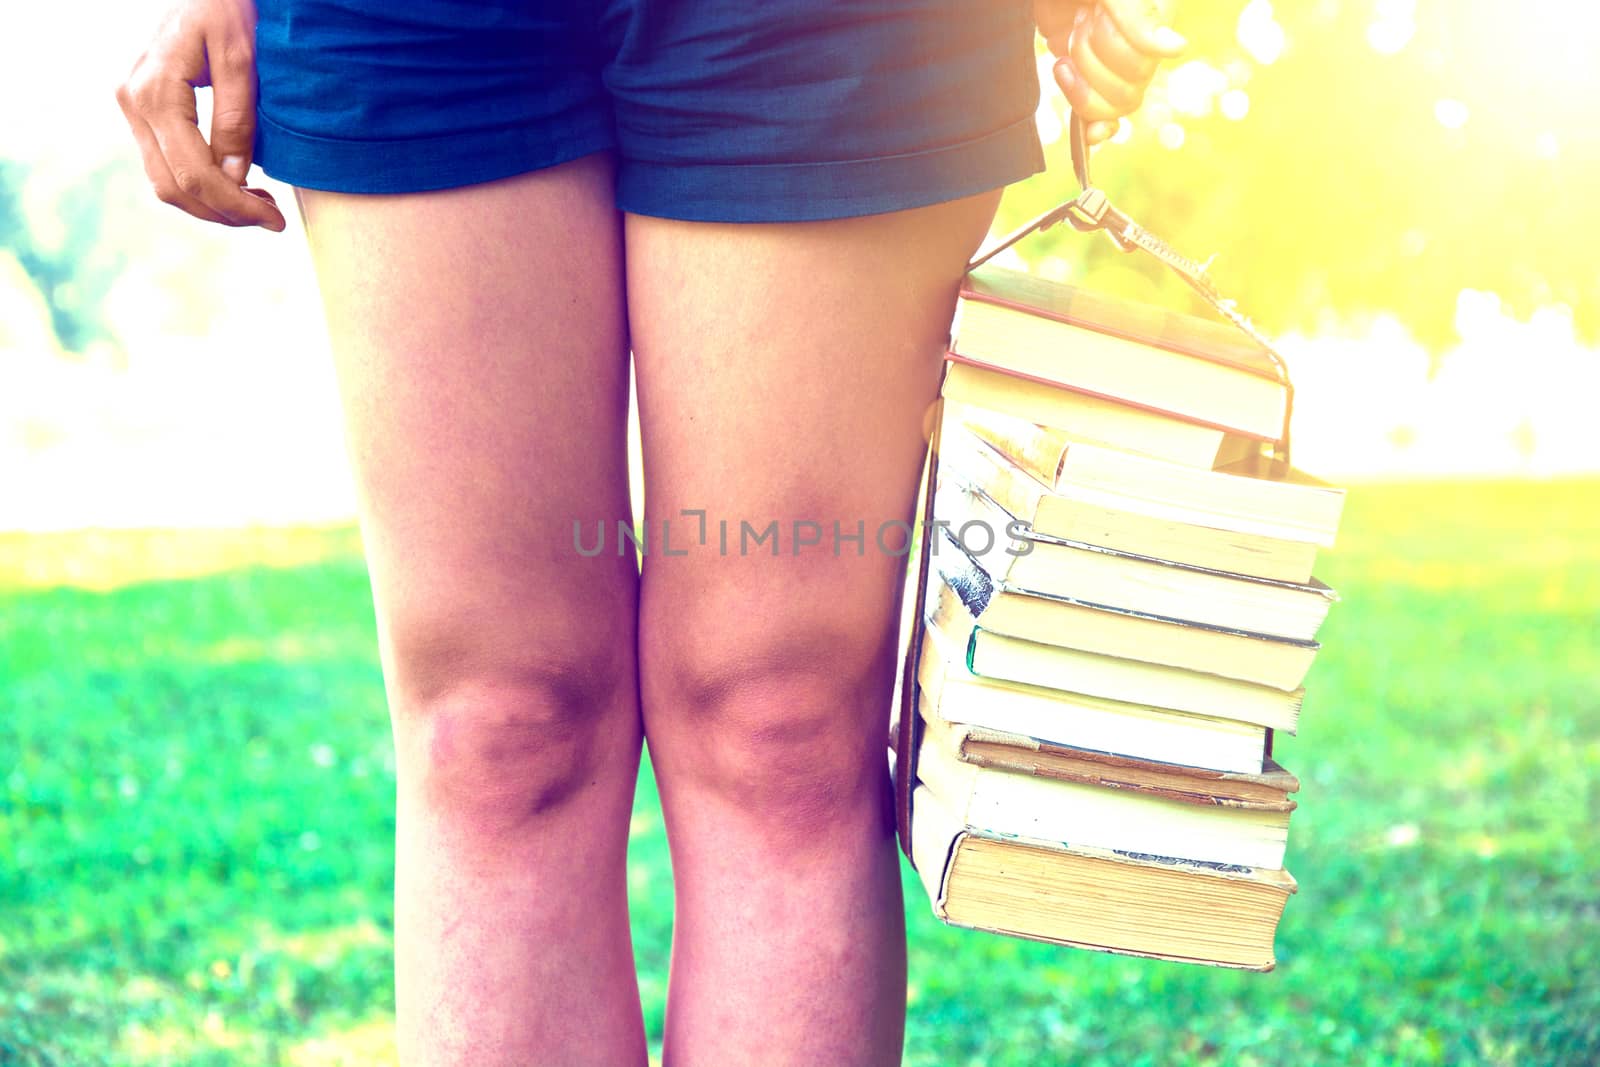 Girl holding a stack of books. Education. Back to school. Instagram vintage picture.